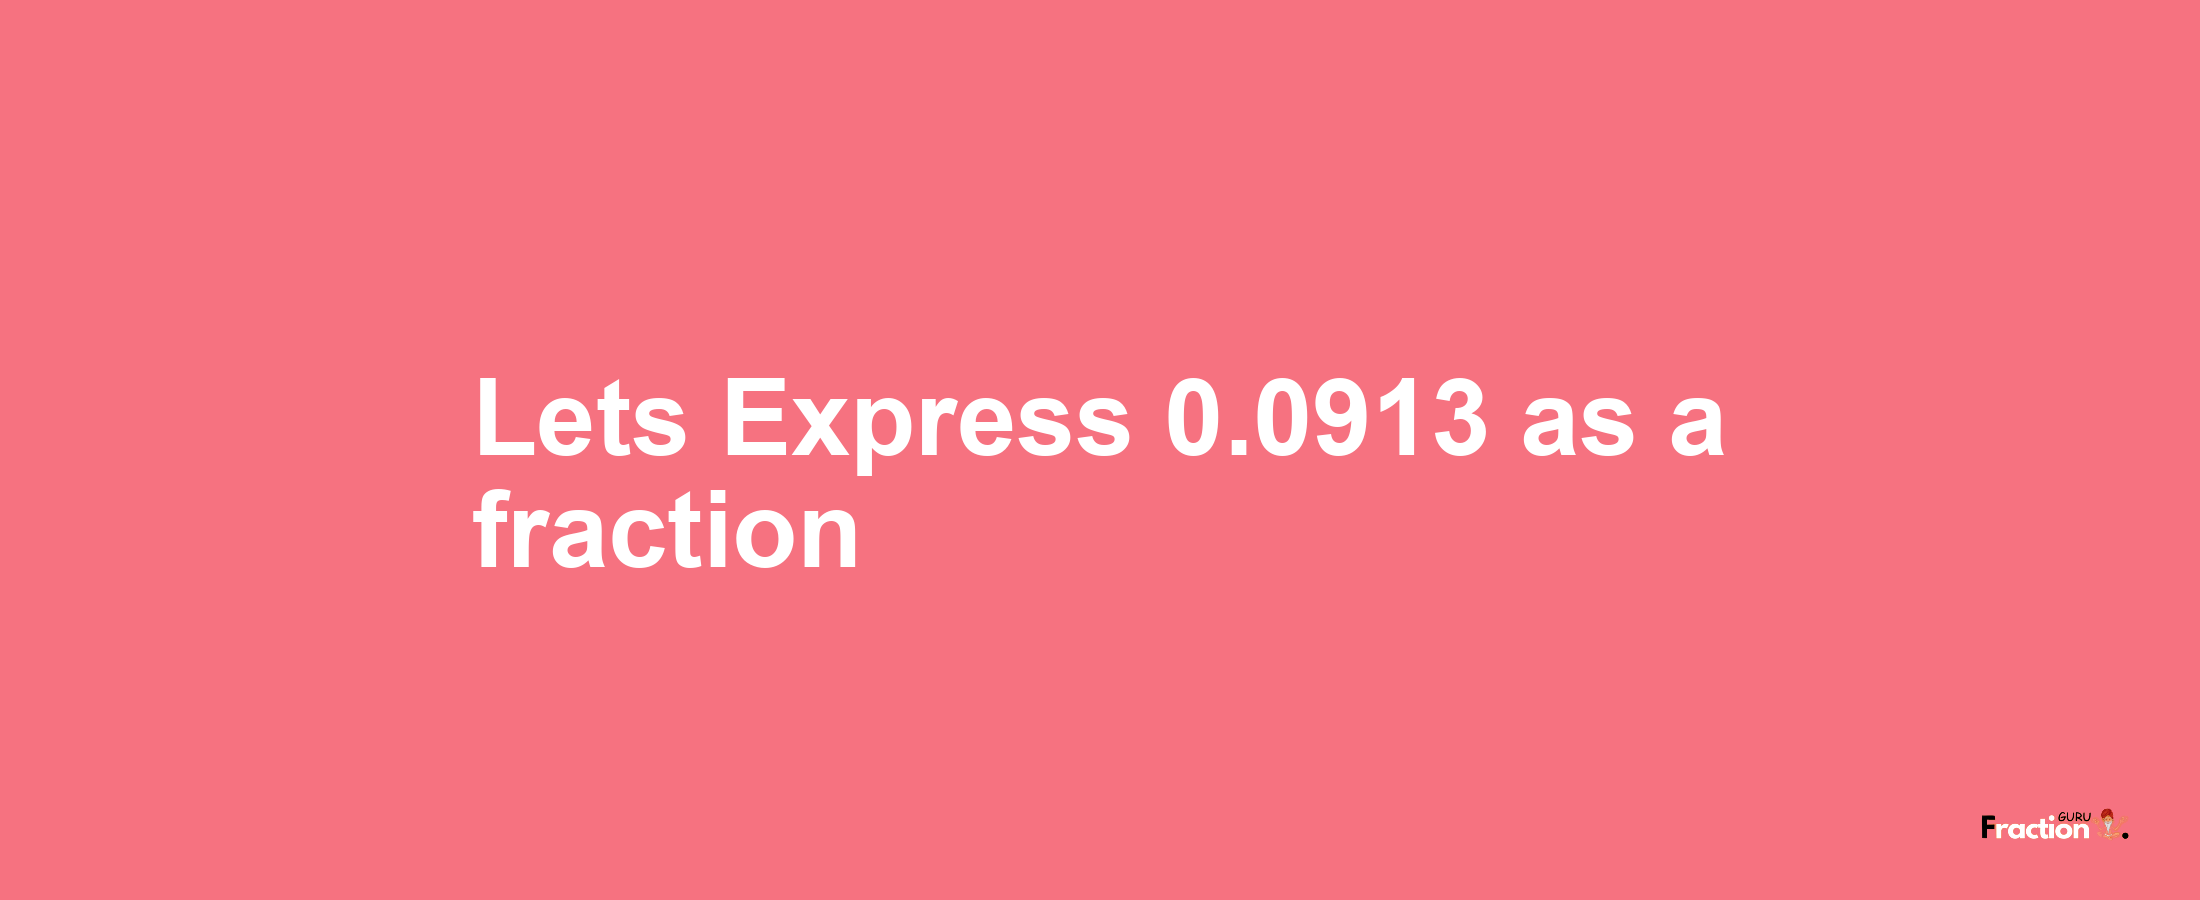 Lets Express 0.0913 as afraction